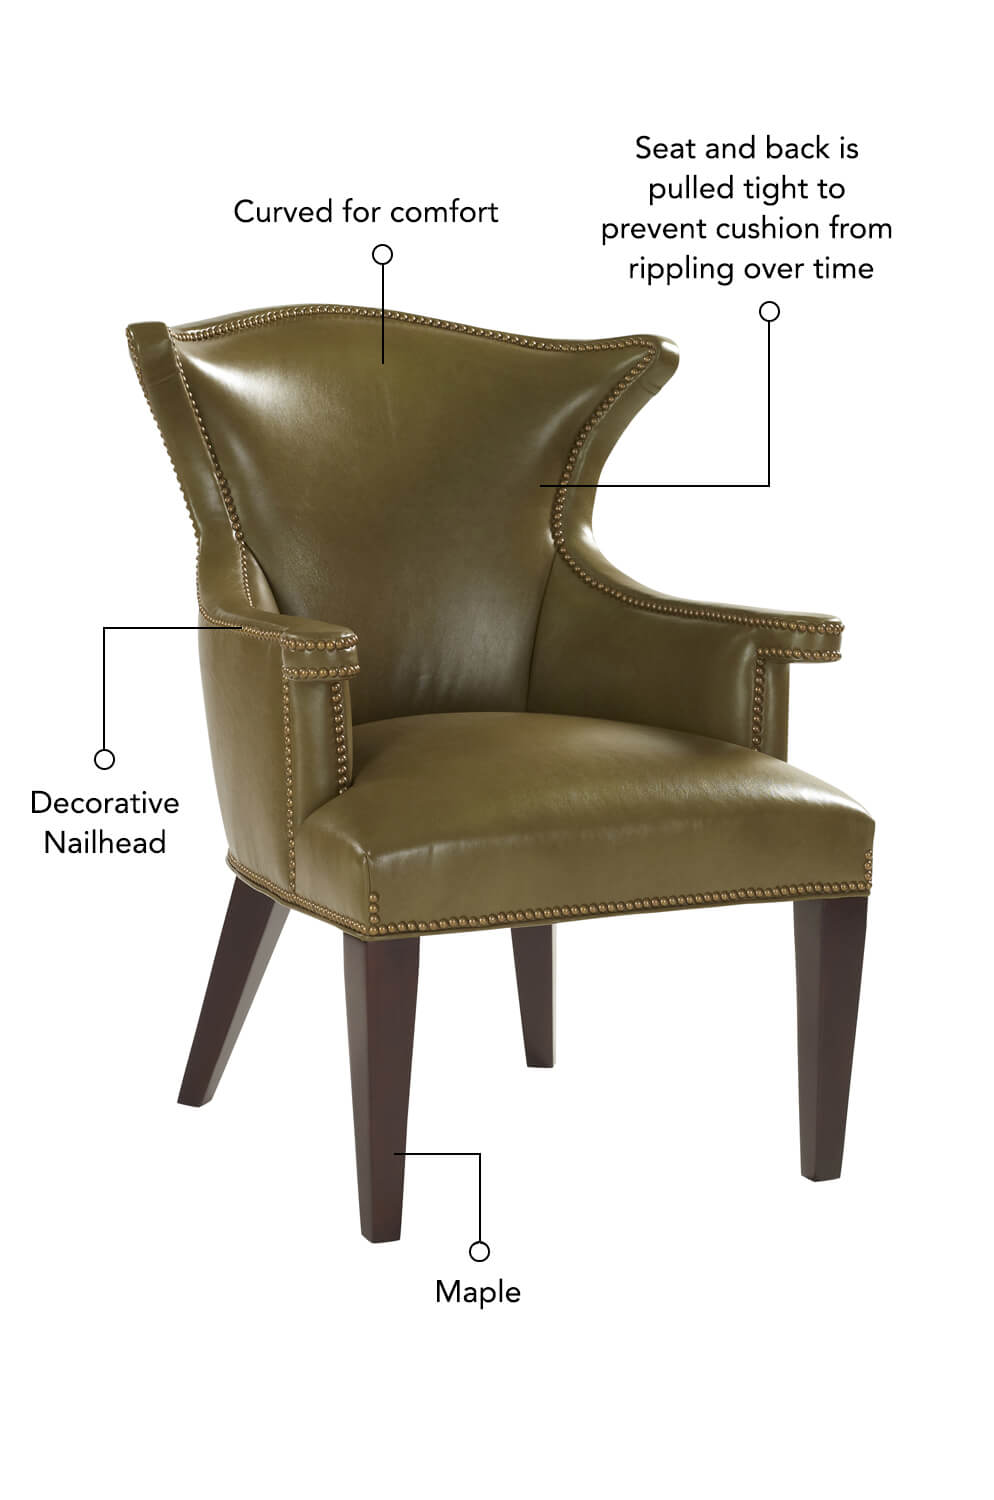 Features decorative nailhead trim around seat, back, and arms, as well as a back curved comfort, maple base. The seat and back is pulled tight to prevent cushion from rippling over time.